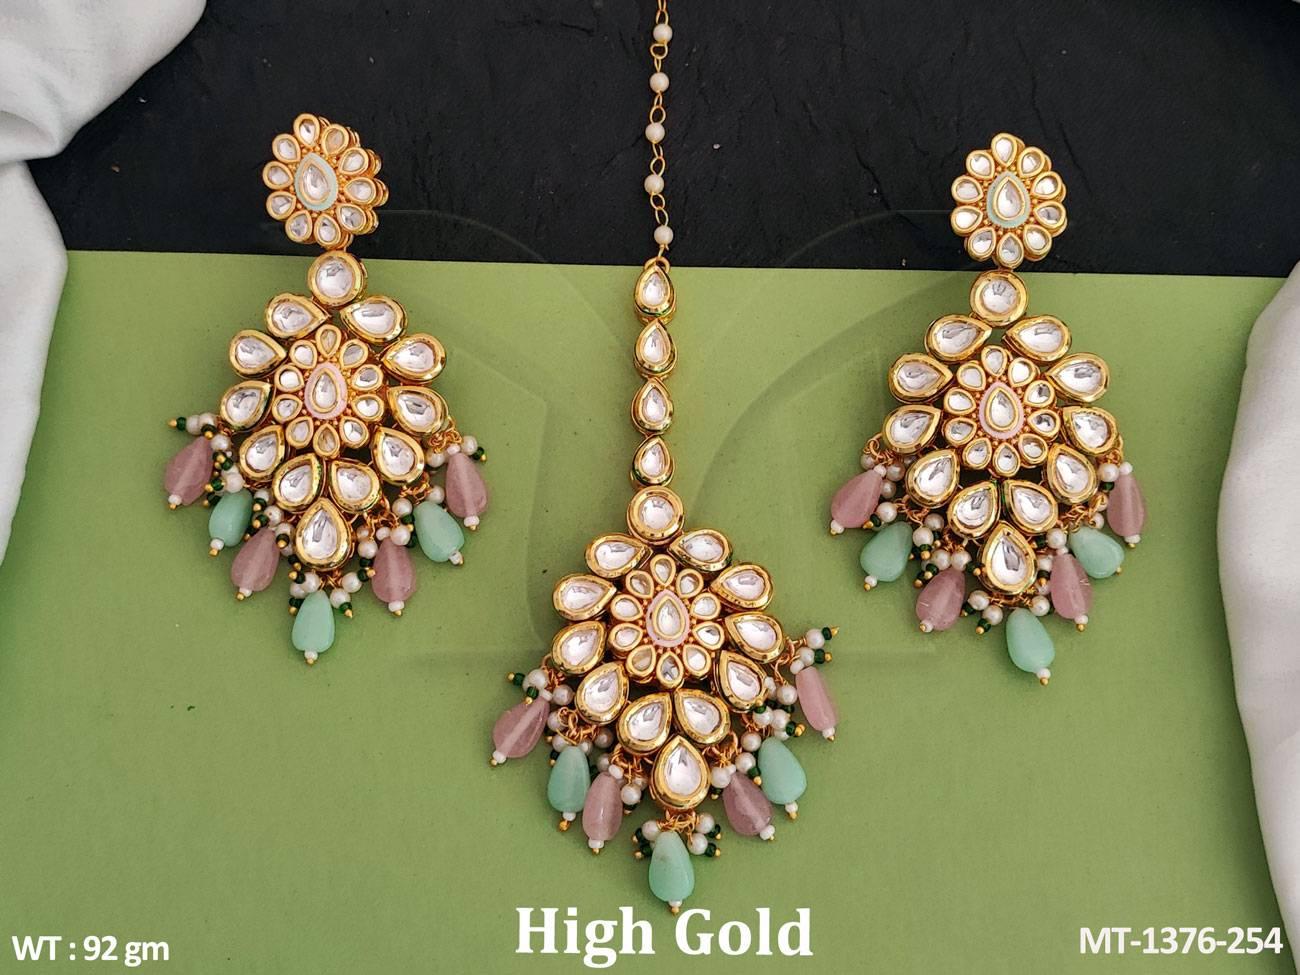 This beautiful kundan maang tikka and earring set is made of high-quality brass metal and features a high gold polish that adds a touch of elegance.